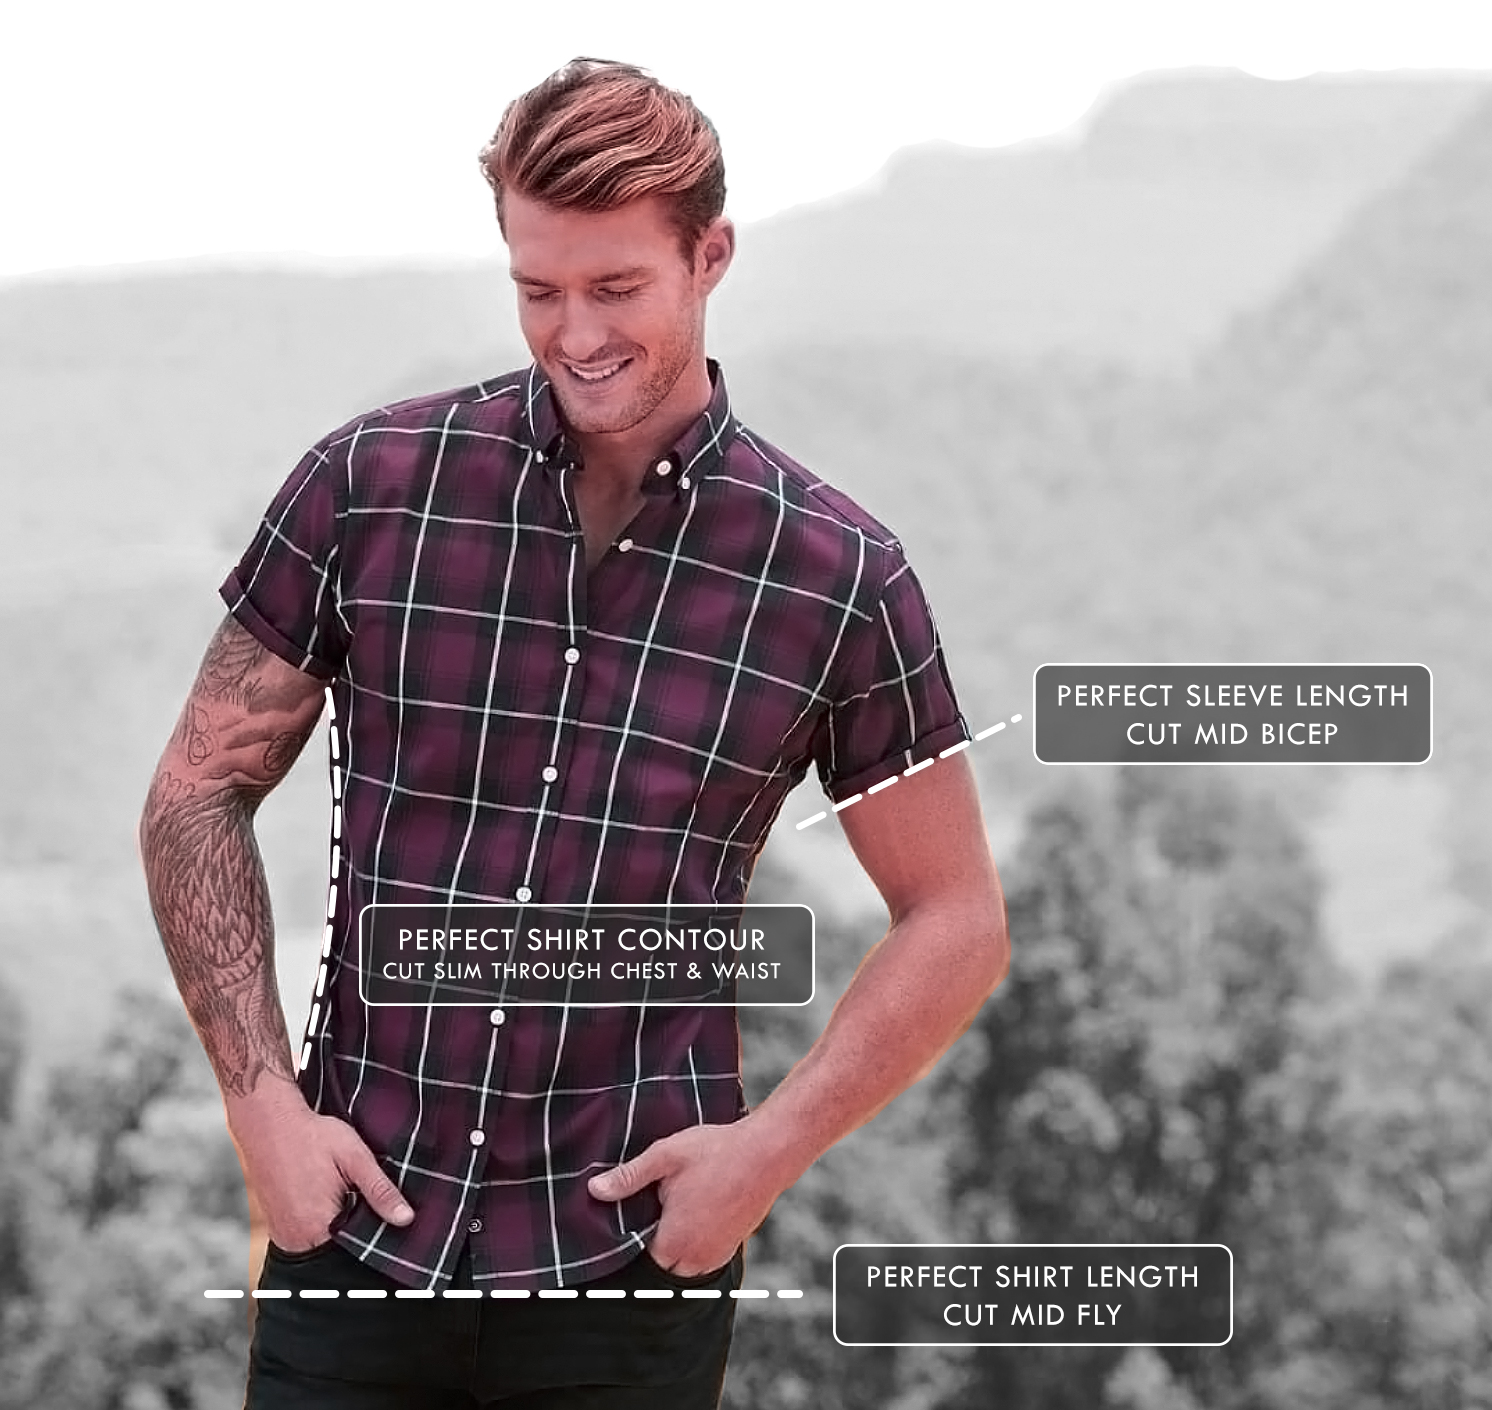 Deoveritas: Untucked vs. Tucked: How to Achieve the Perfect Shirt